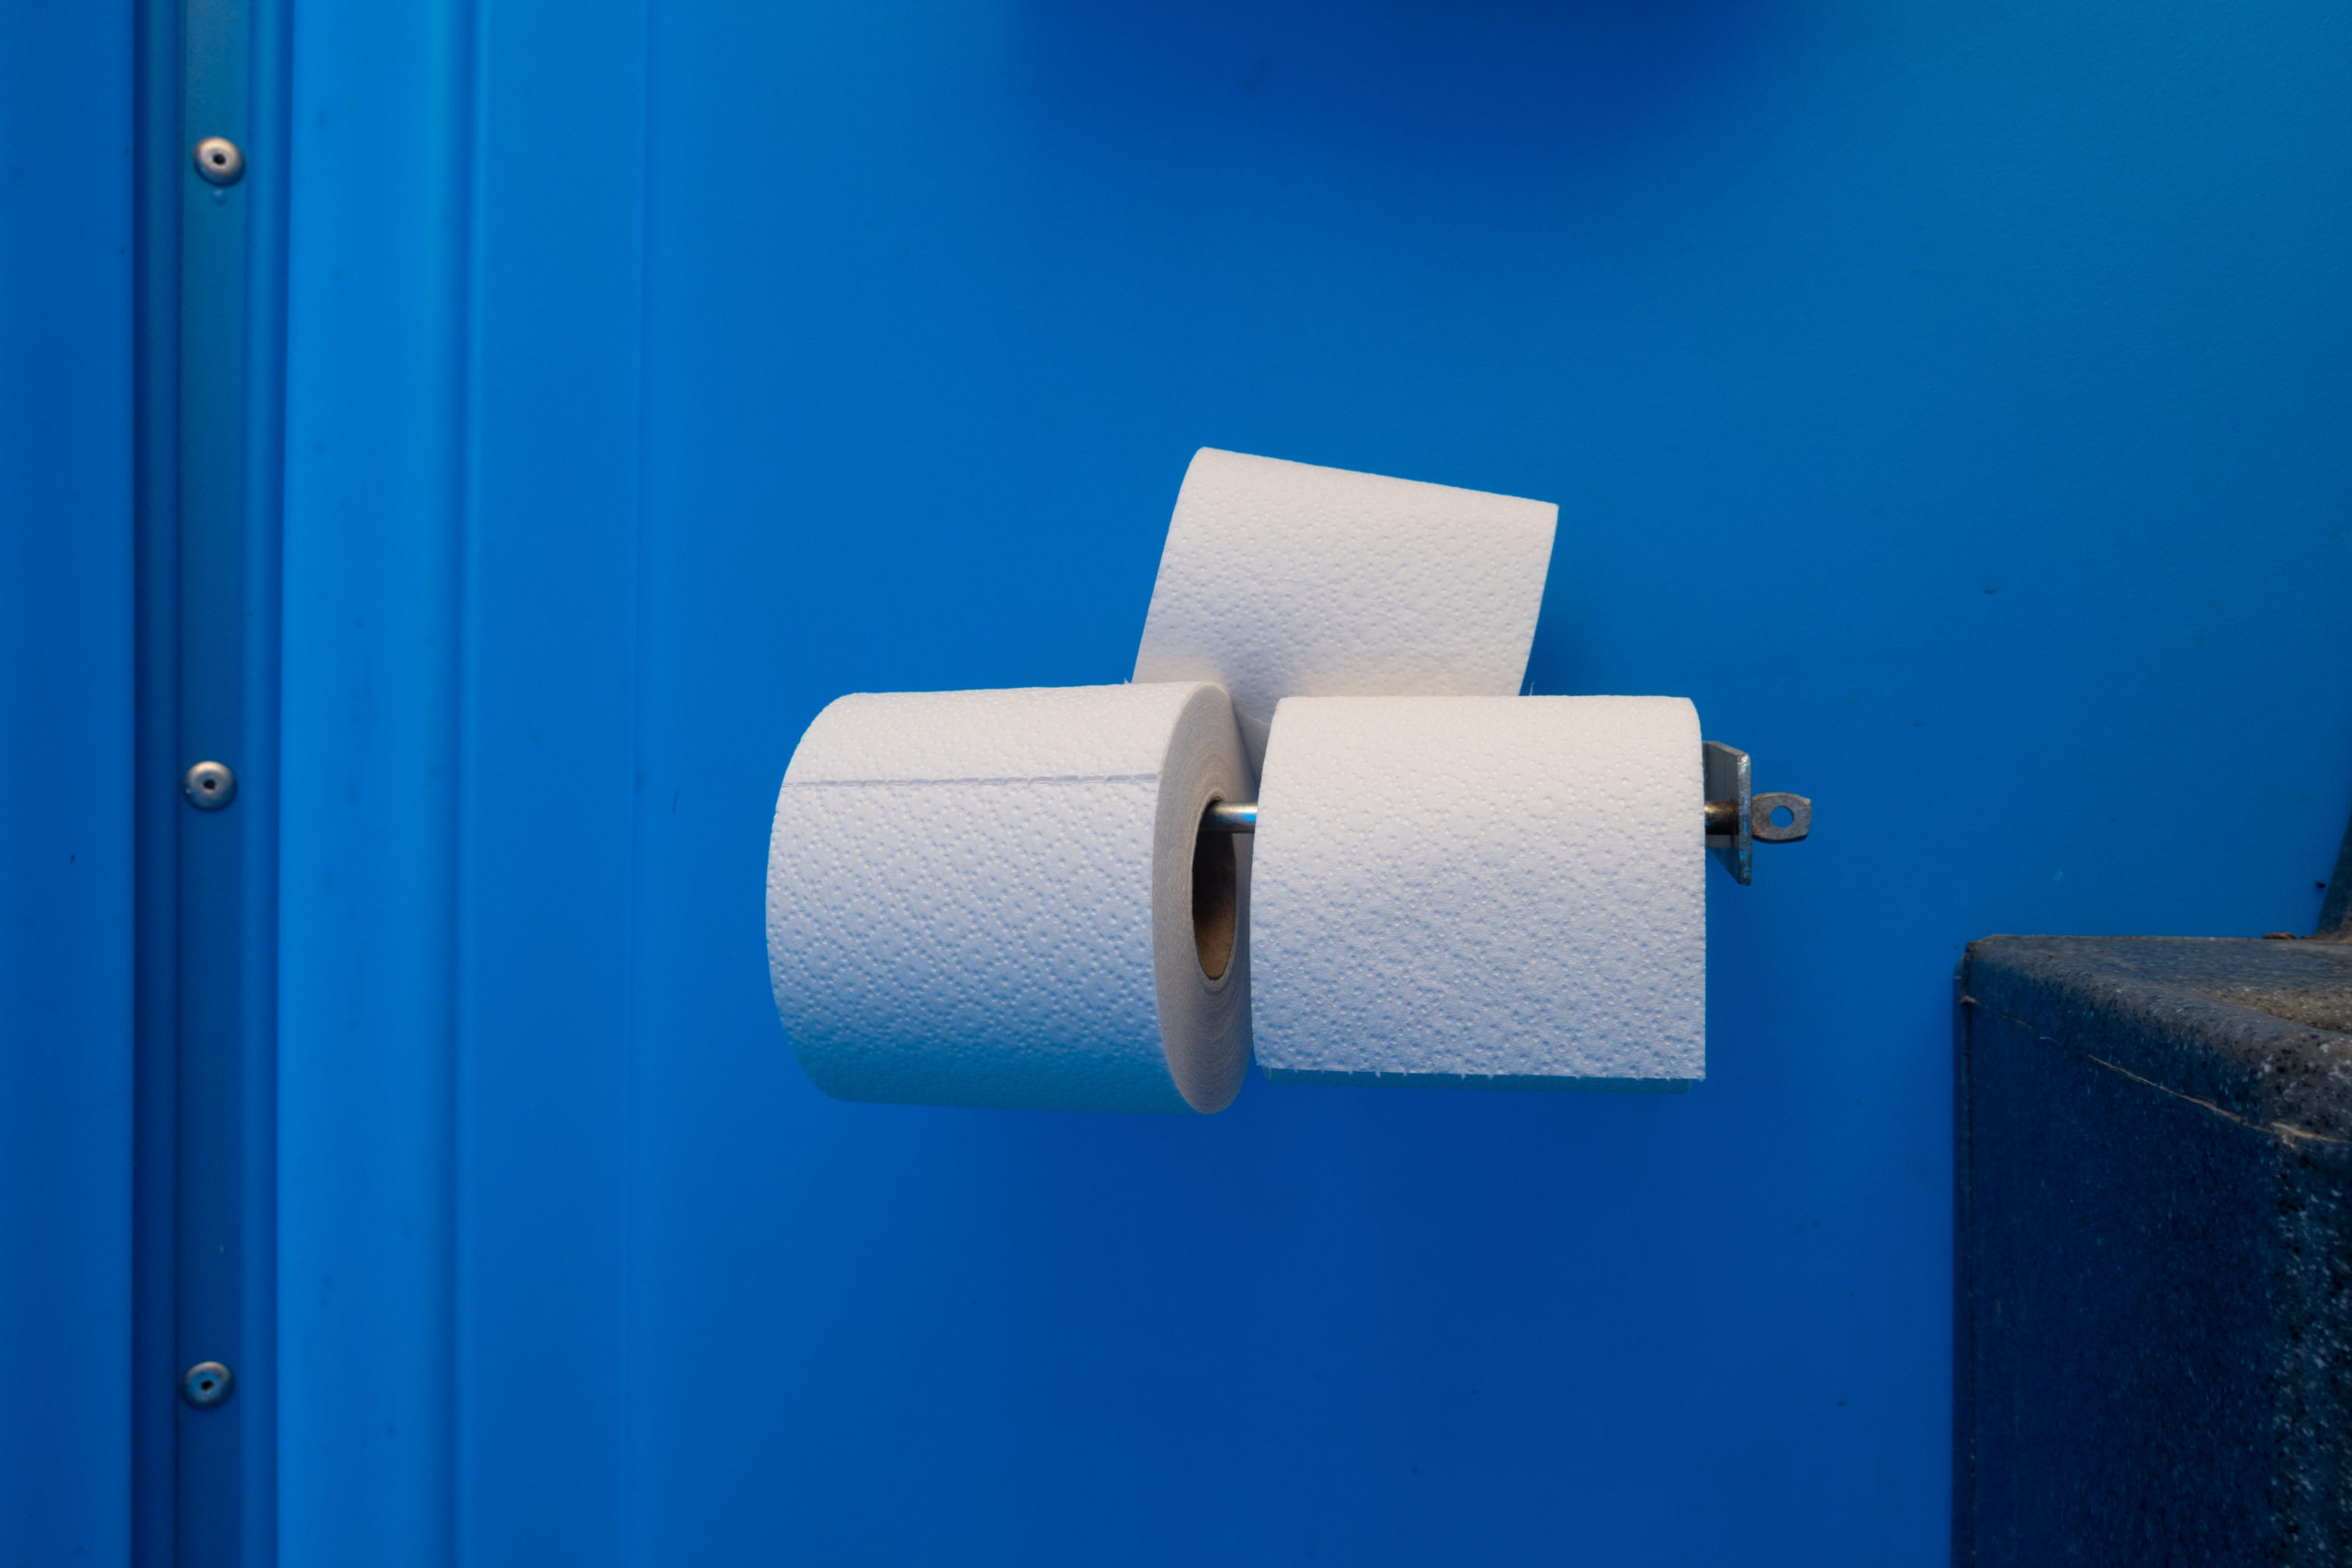 3 toilet paper rolls are located on a blue wall of a mobile toilet